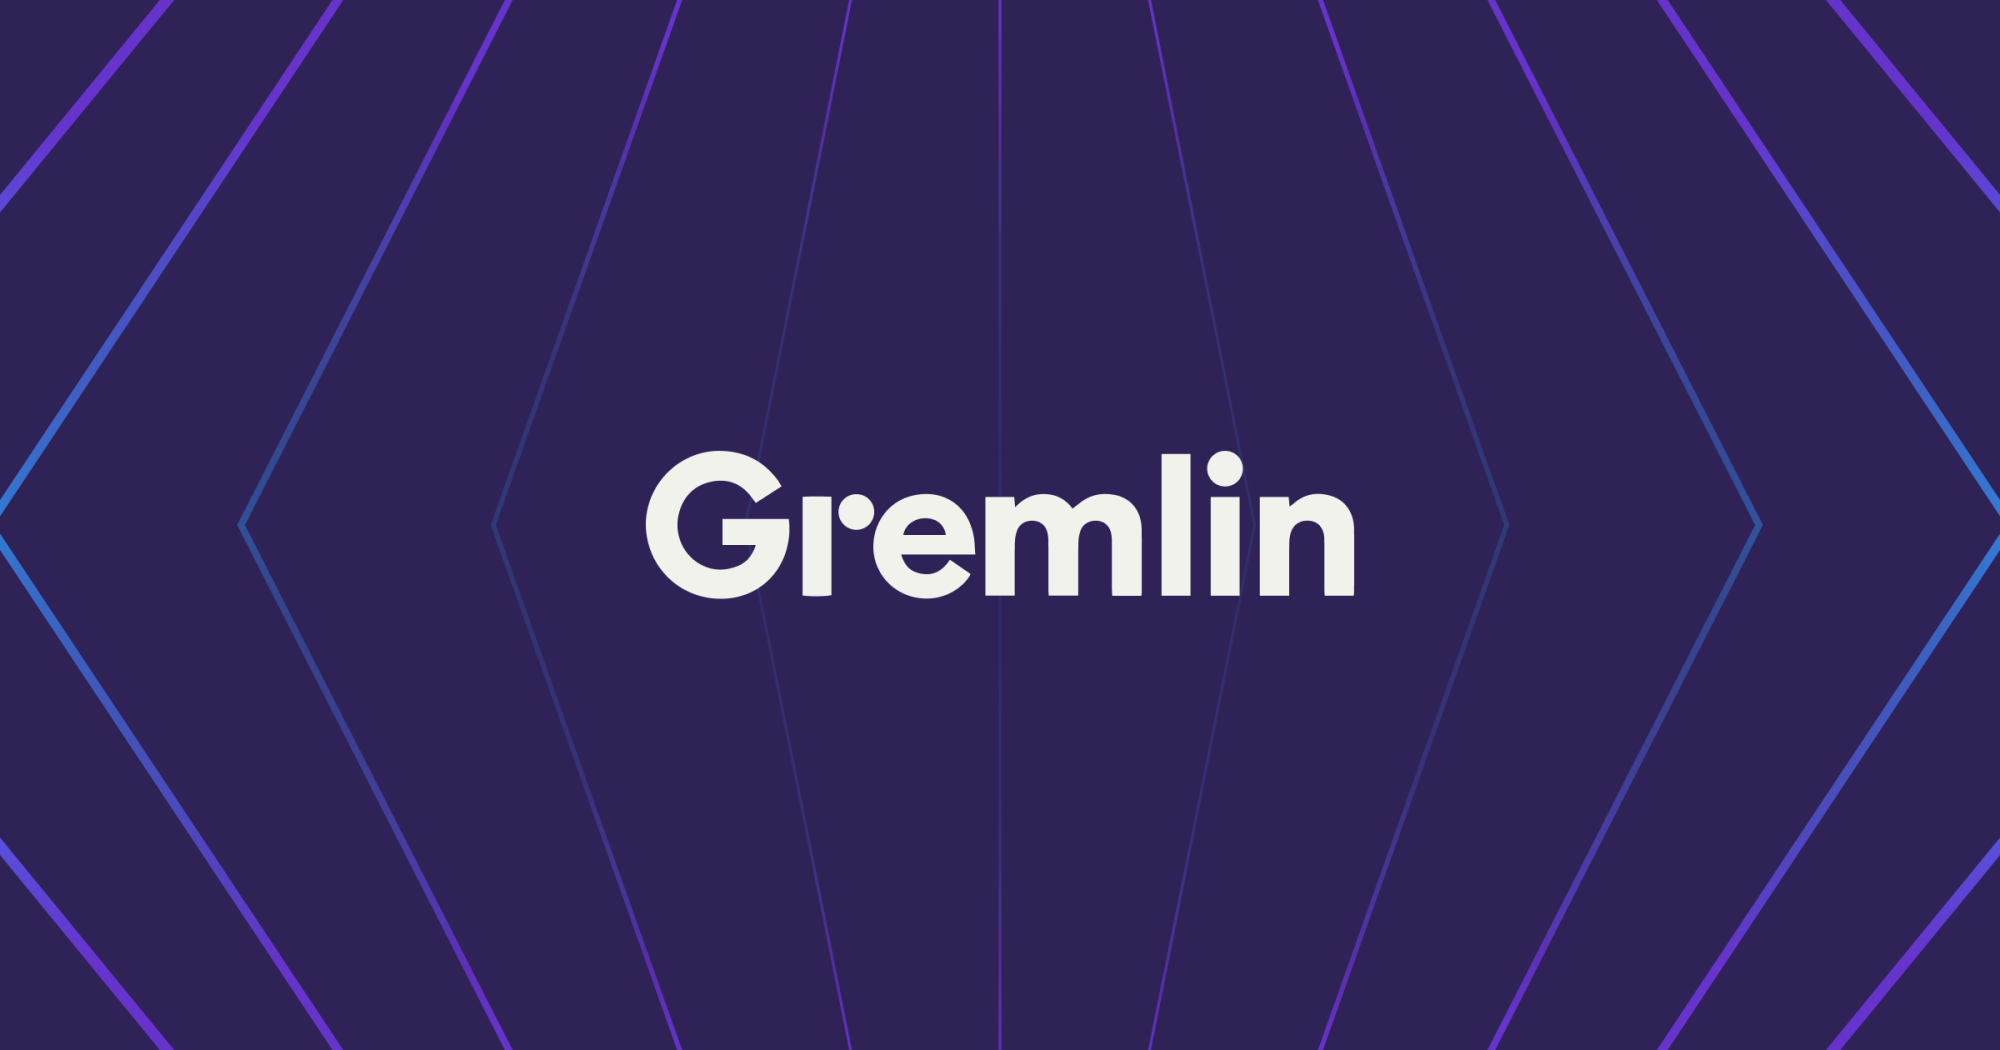 How to Install and Use Gremlin on Google Compute Engine with Ubuntu 16.04